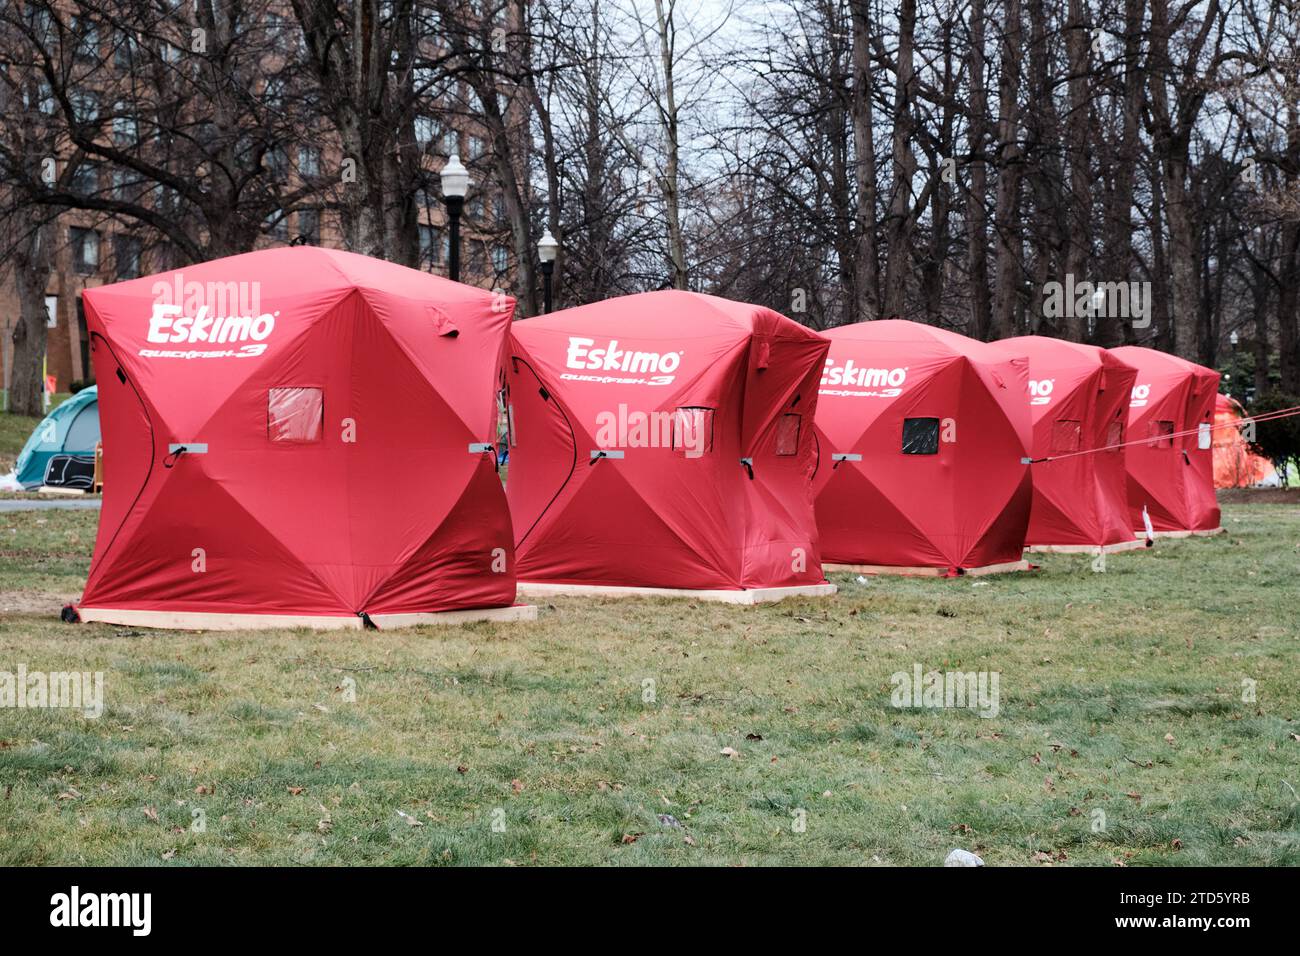 Eskimo tents, usually used for ice fishing, installed by volunteers as  residence for homeless in Victoria Park, Halifax Stock Photo - Alamy